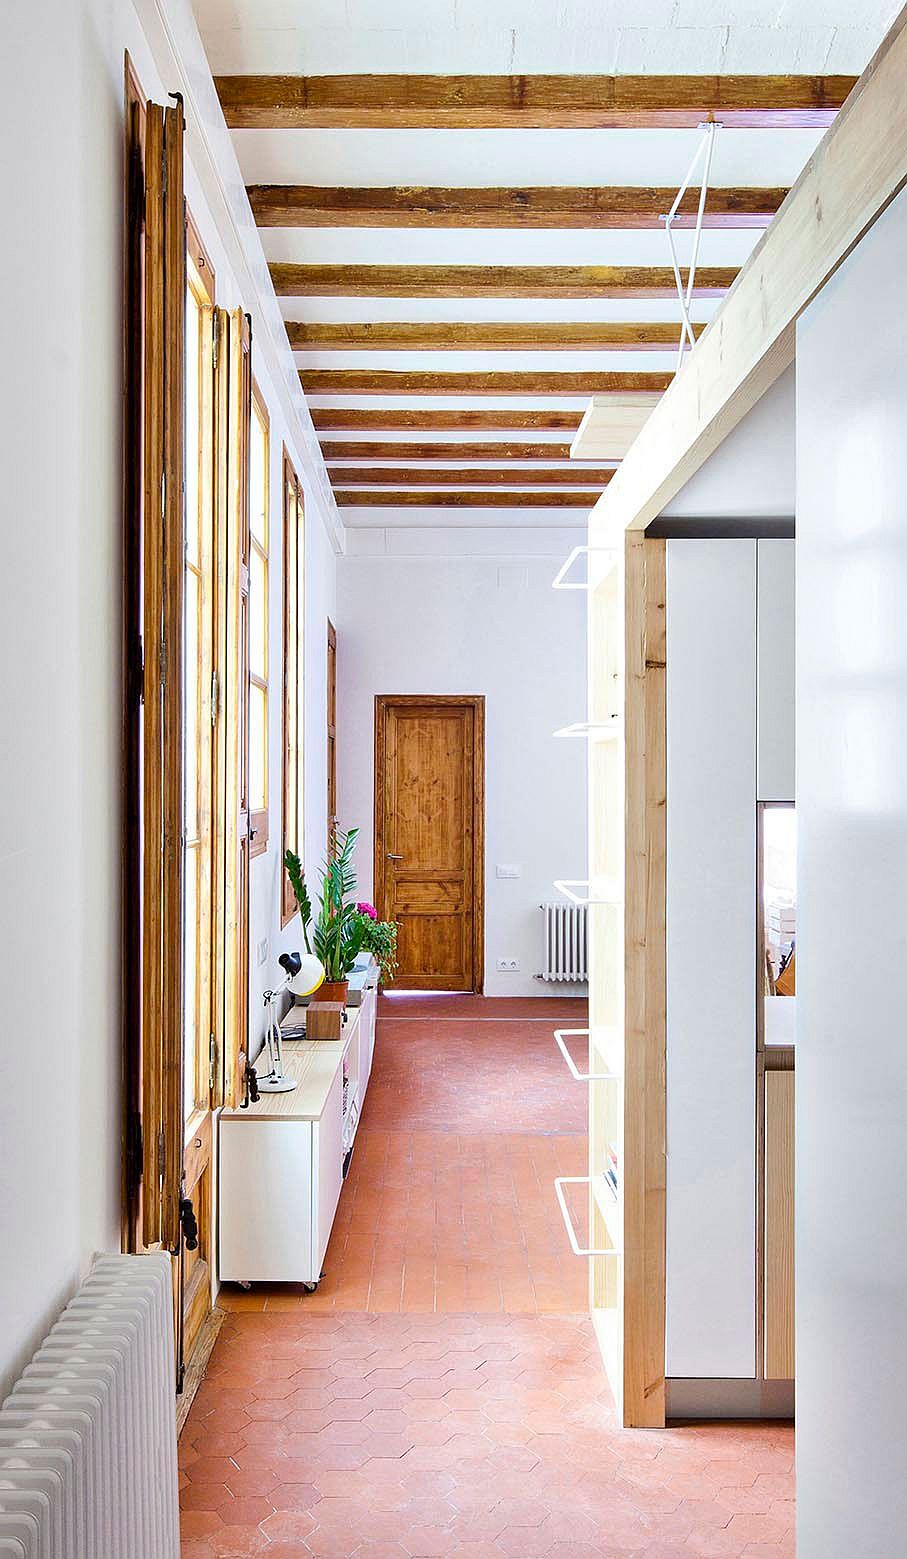 Large windows and exposed wooden beams showcase the past of the apartment